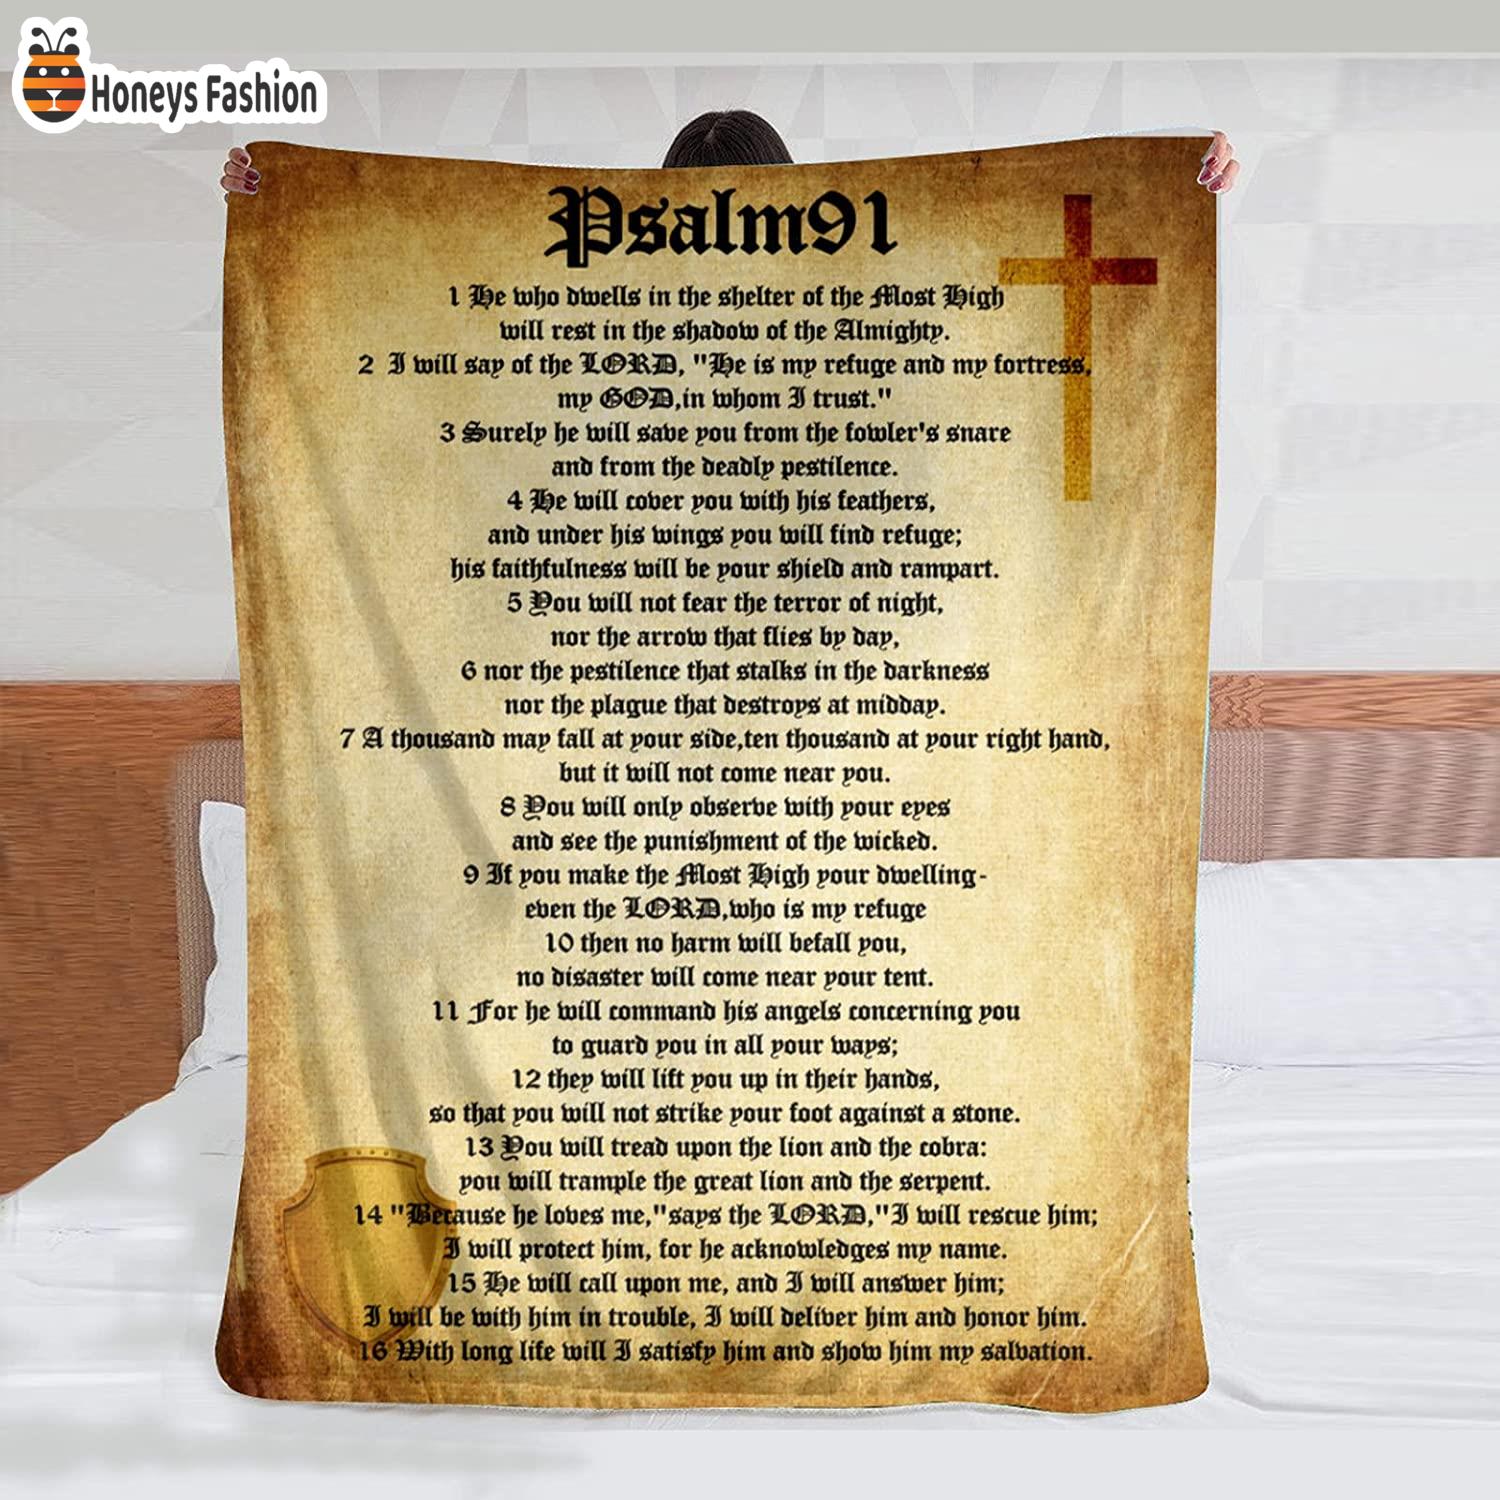 Psalm 91 Religious Inspirational Thoughts and Prayers Super Soft Blanket